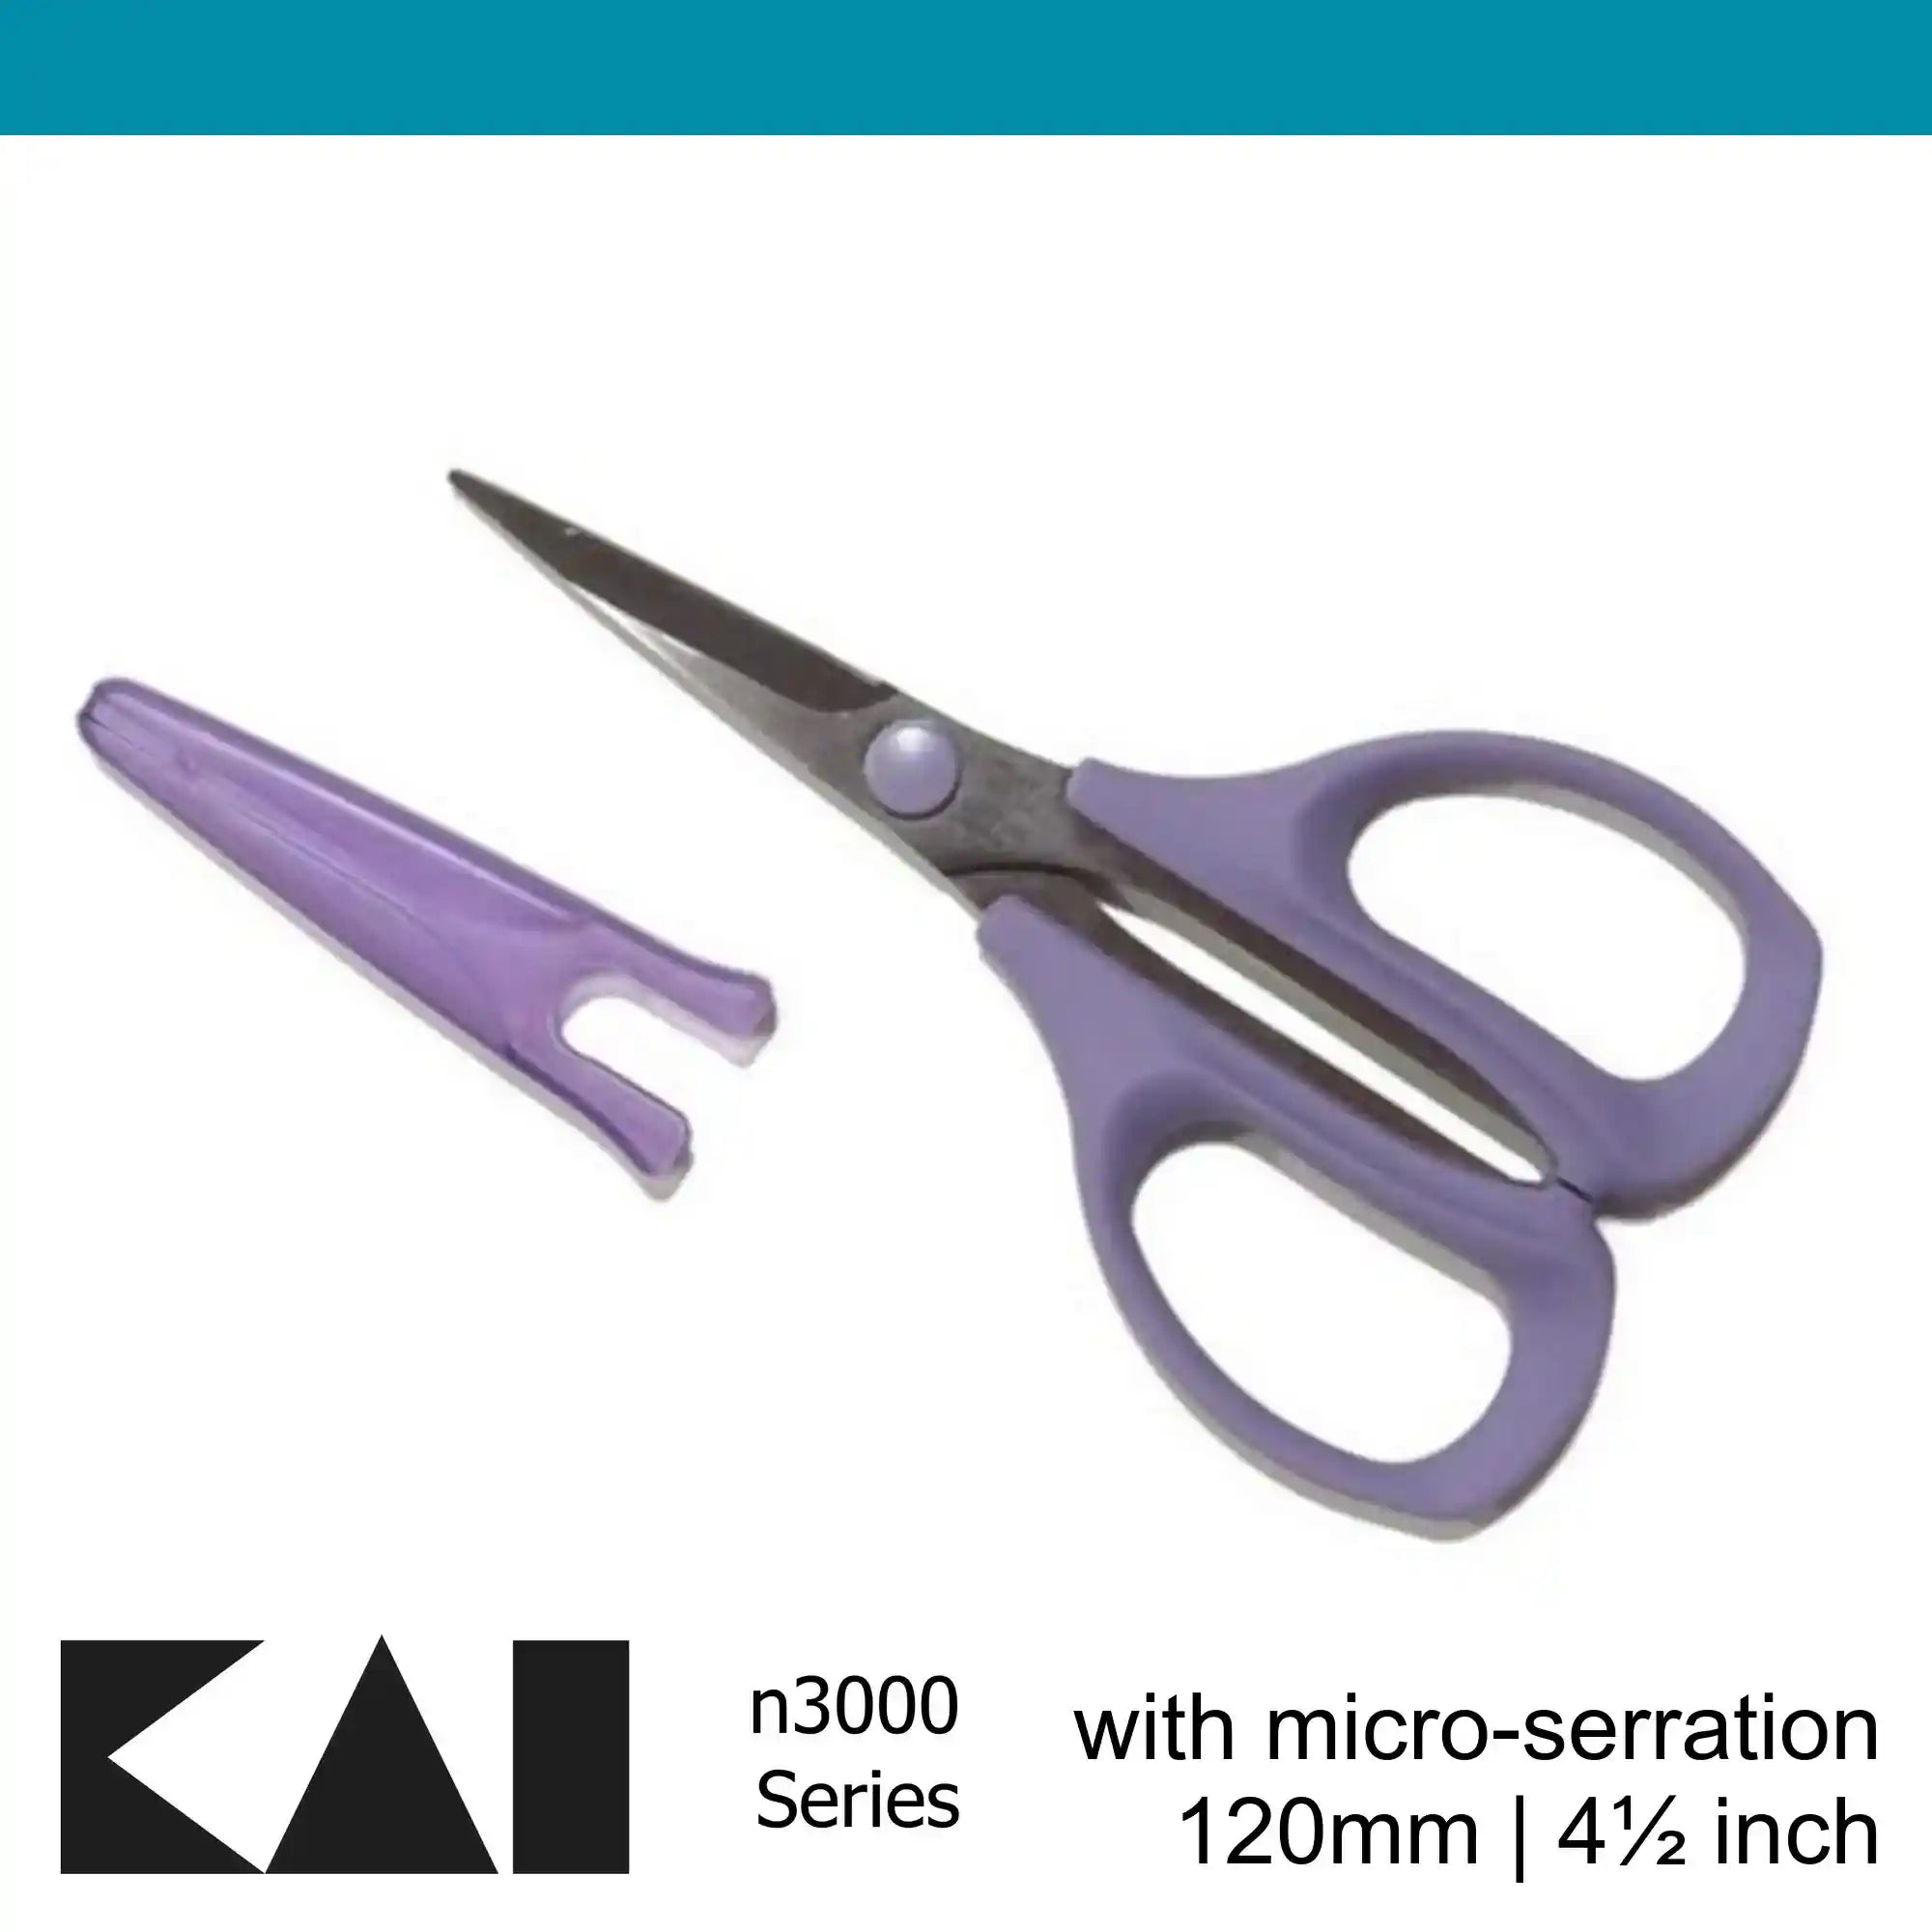 Kai 3120se Patchwork embroidery serrated scissors 120 mm